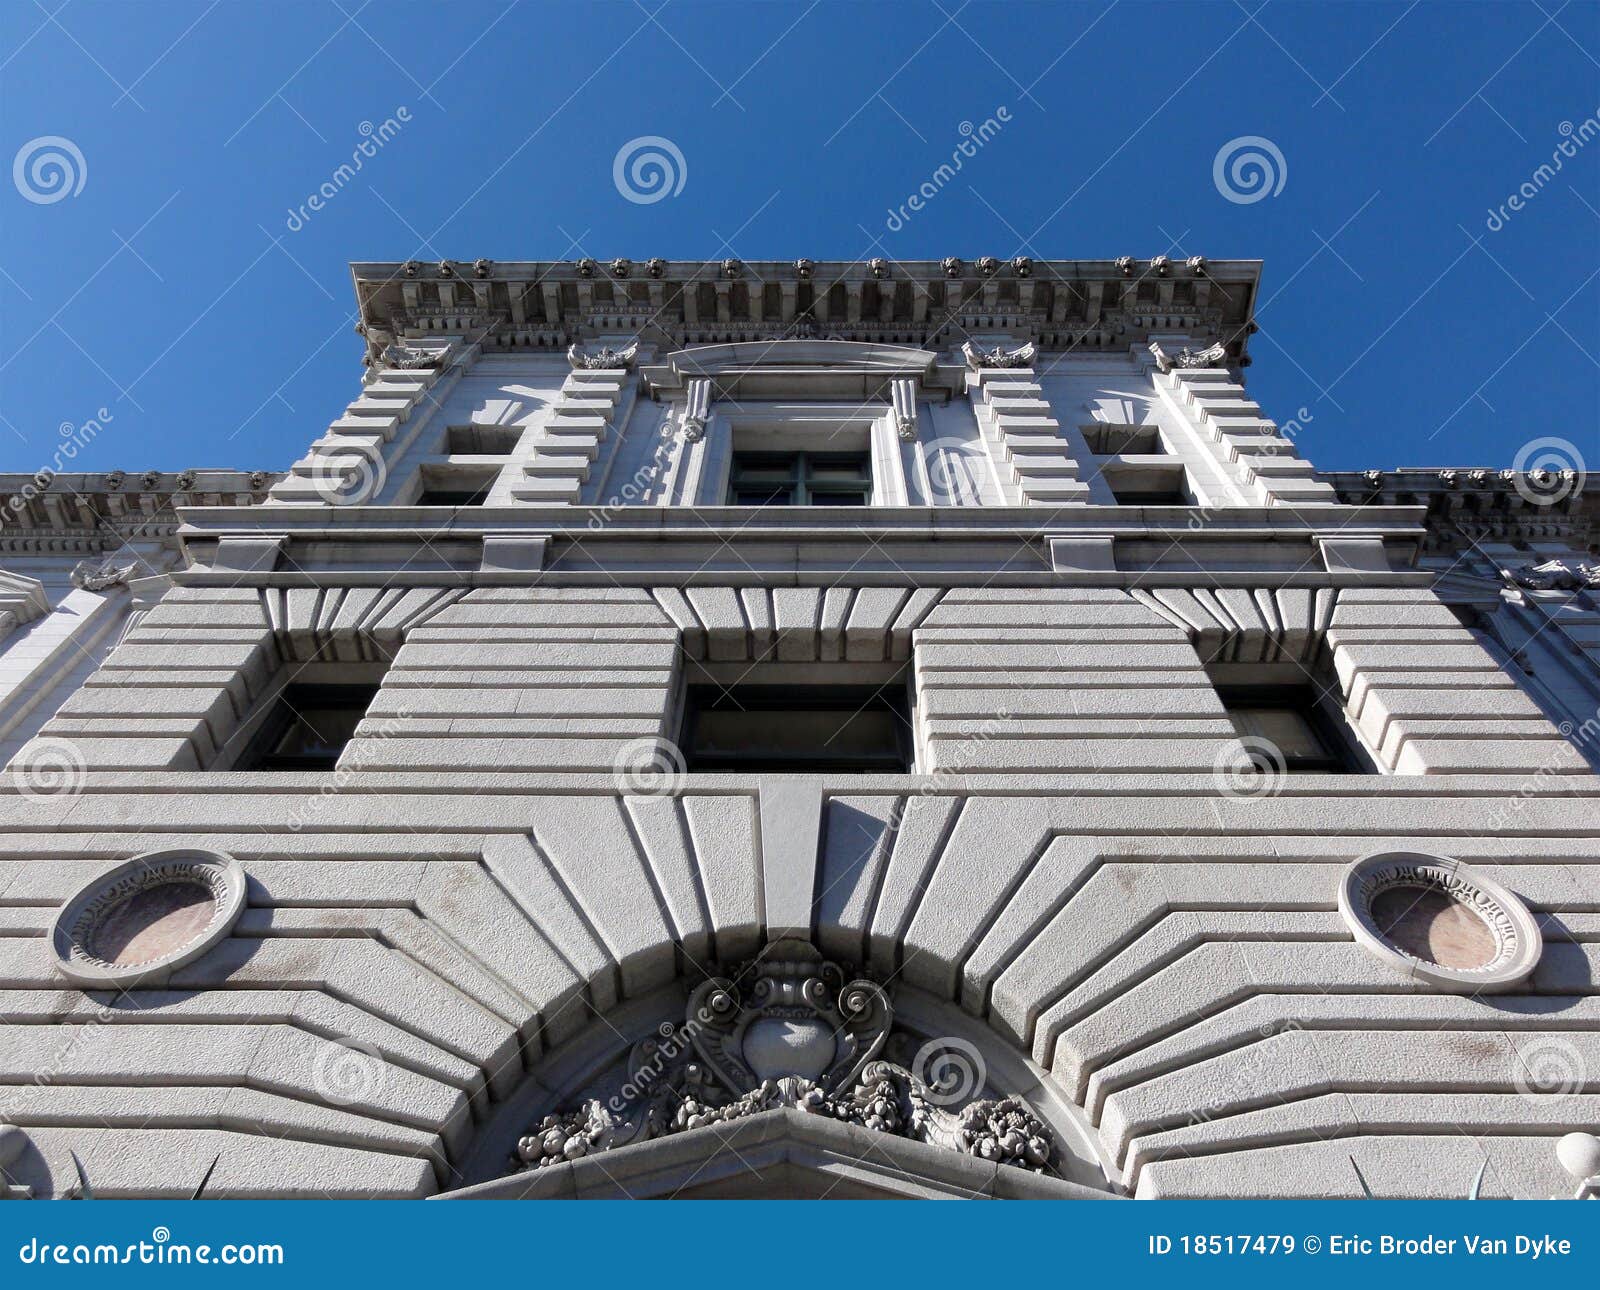 the united states court of appeals, ninth circuit